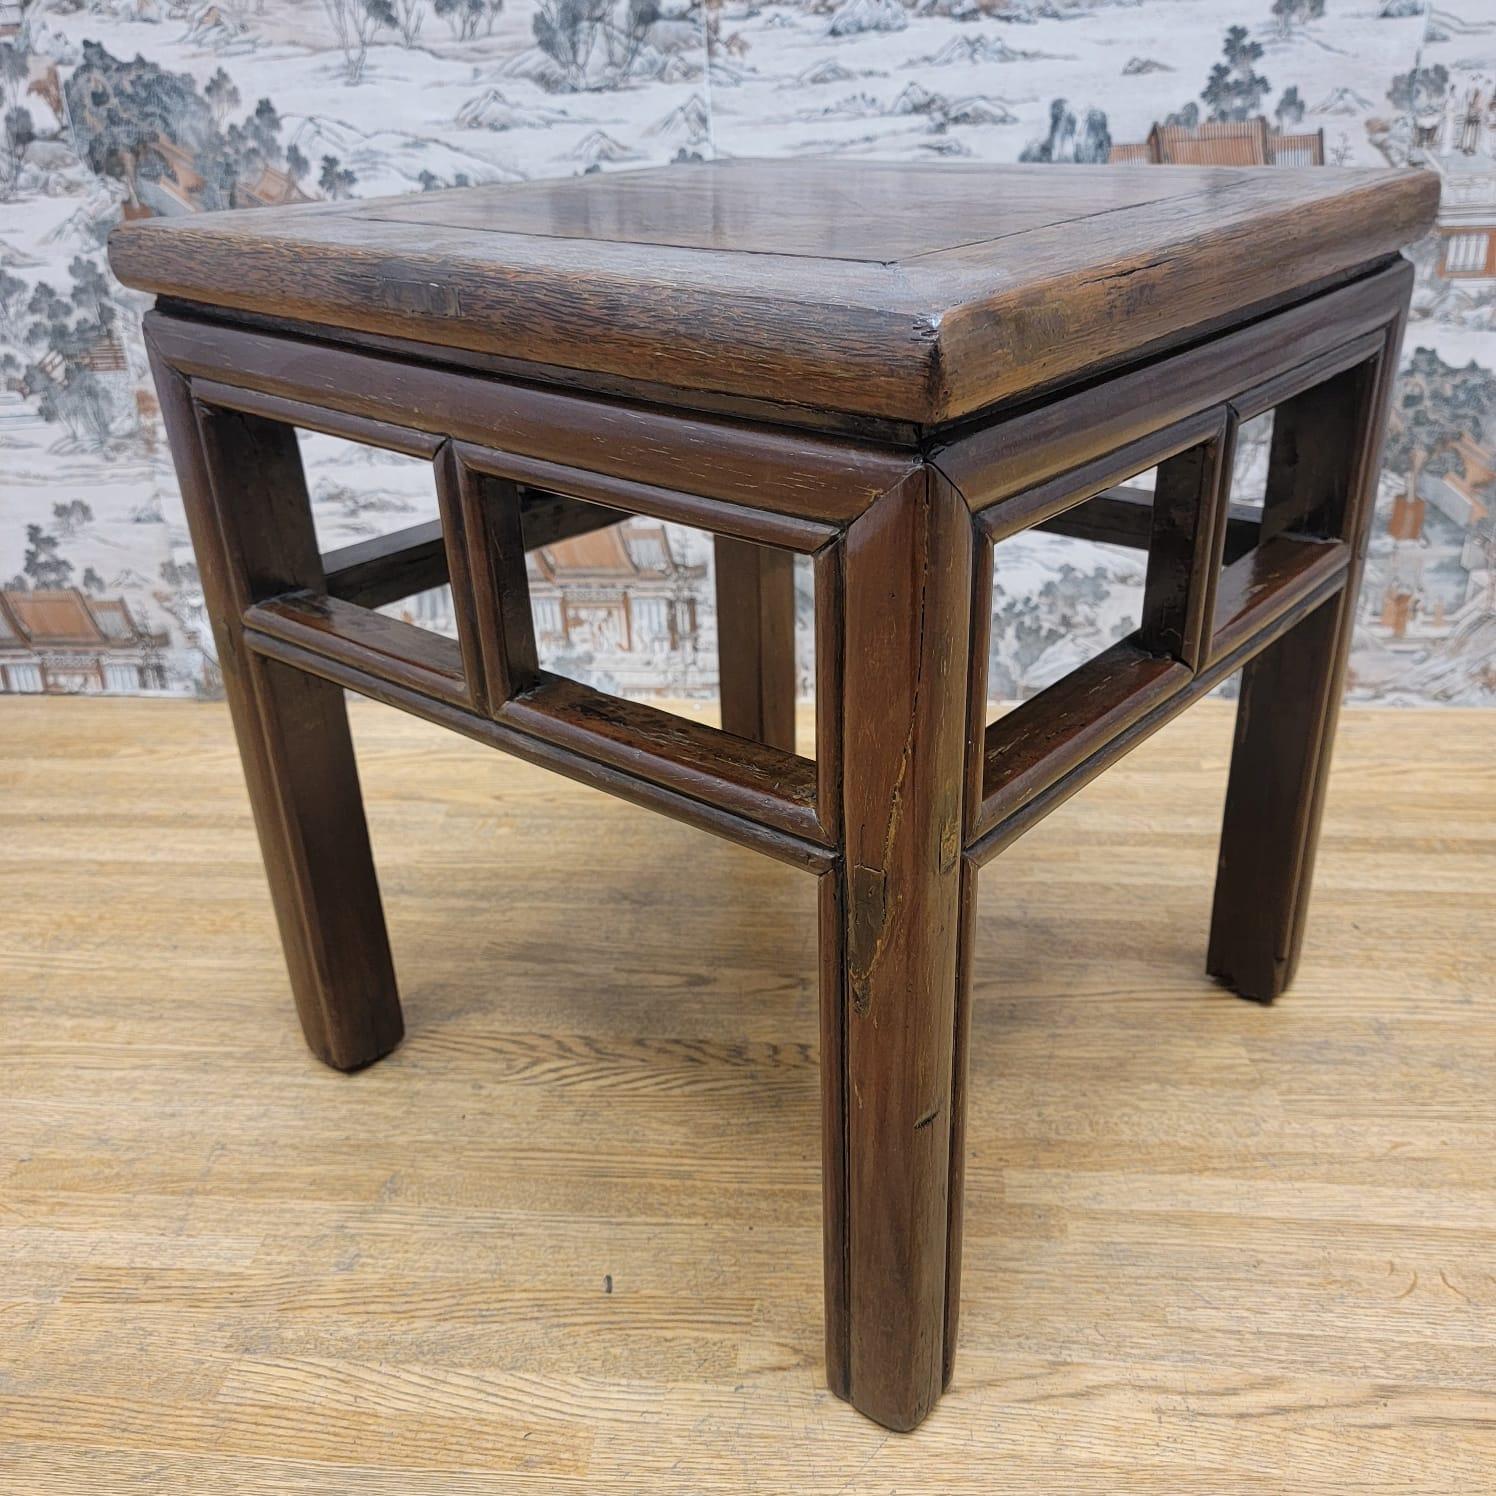 Antique Shanxi province elm square side table.

This antique Shanxi Province elm square side table from China, has its original color and patina. 

Circa 1900

D 17.5”
W 17”
H 20”.
 